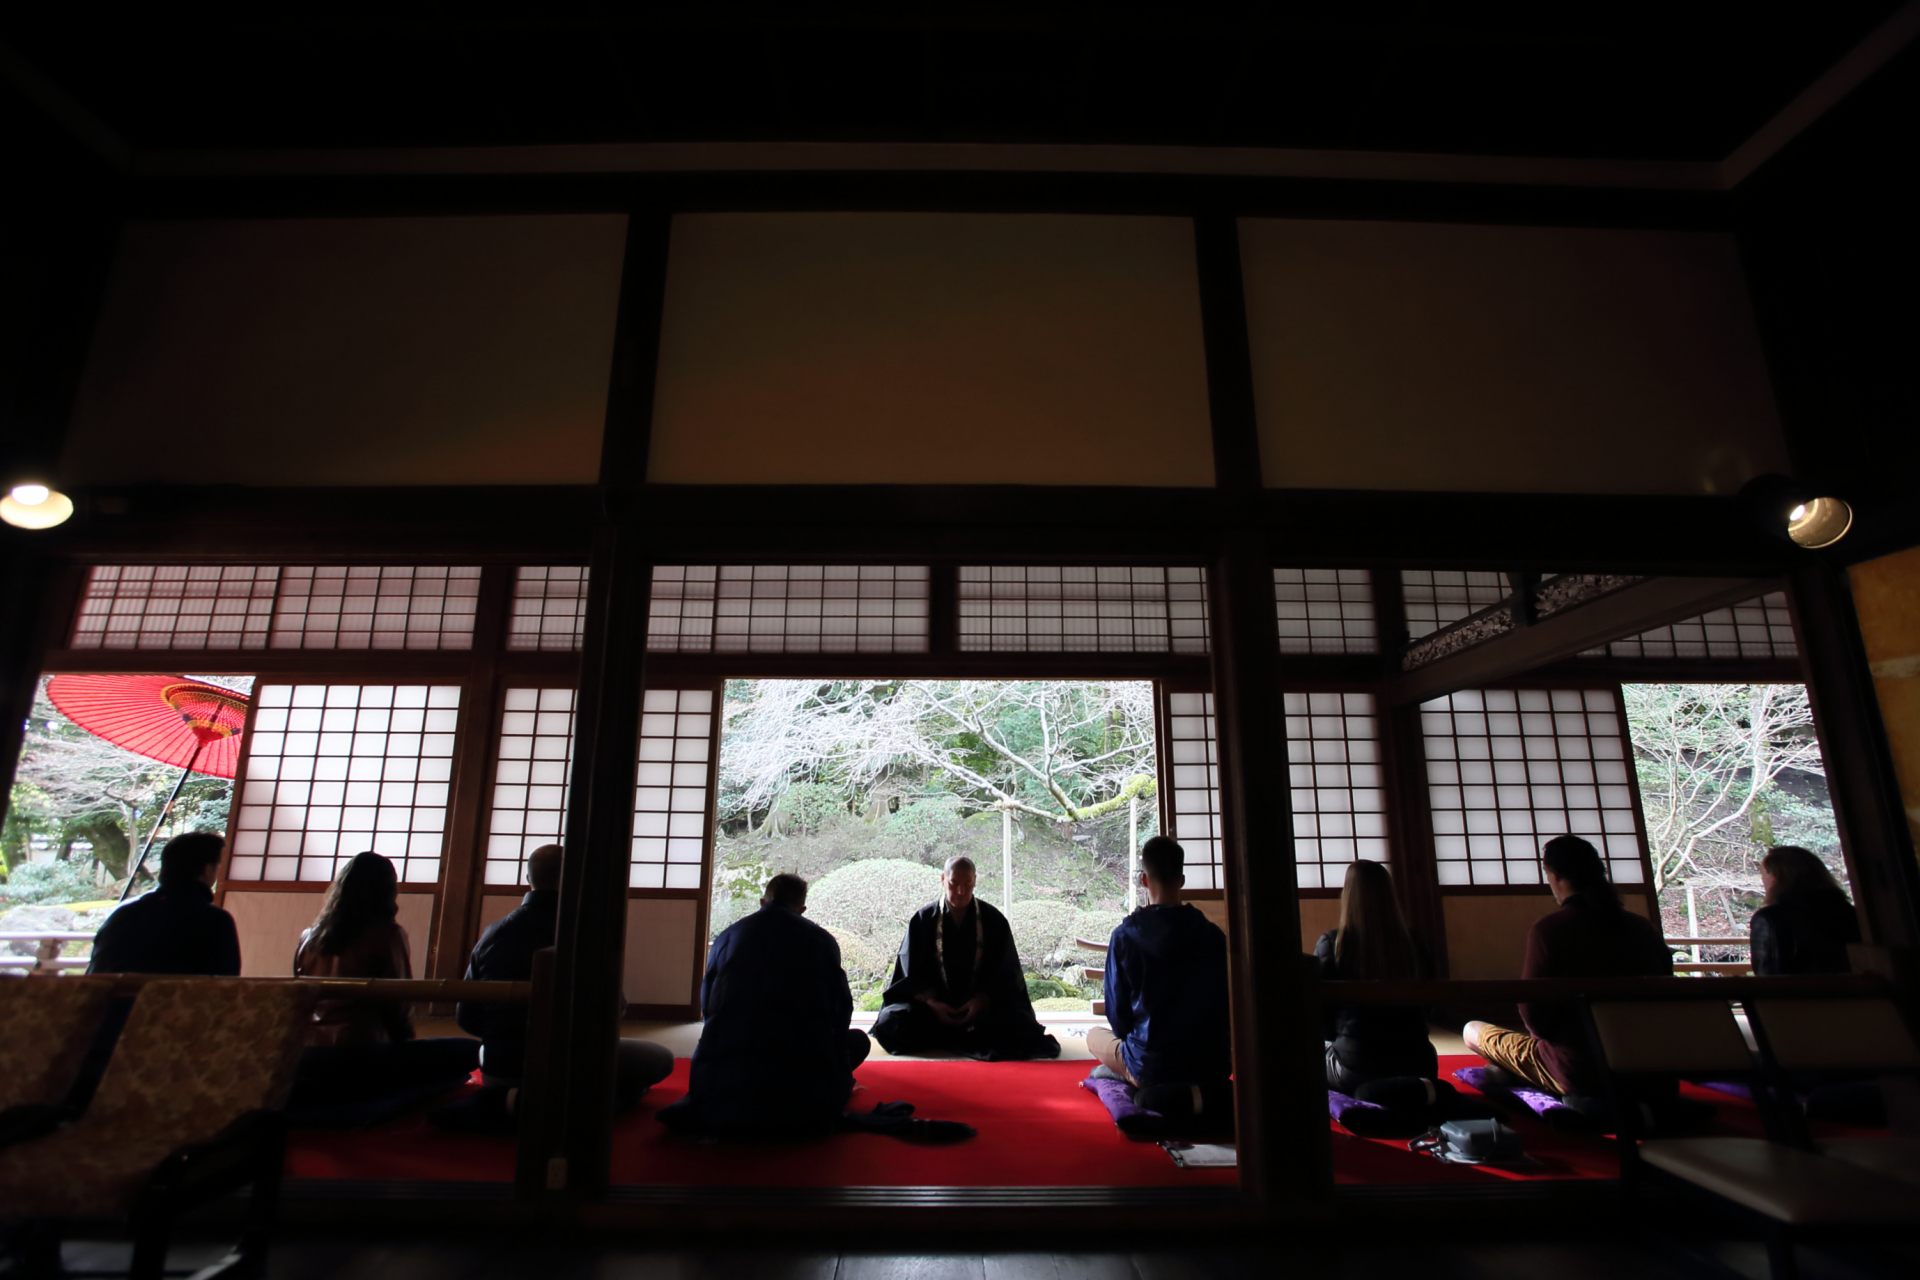 Experience traditional Japanese culture at a historic Buddhist temple that  is connected to the Imperial family